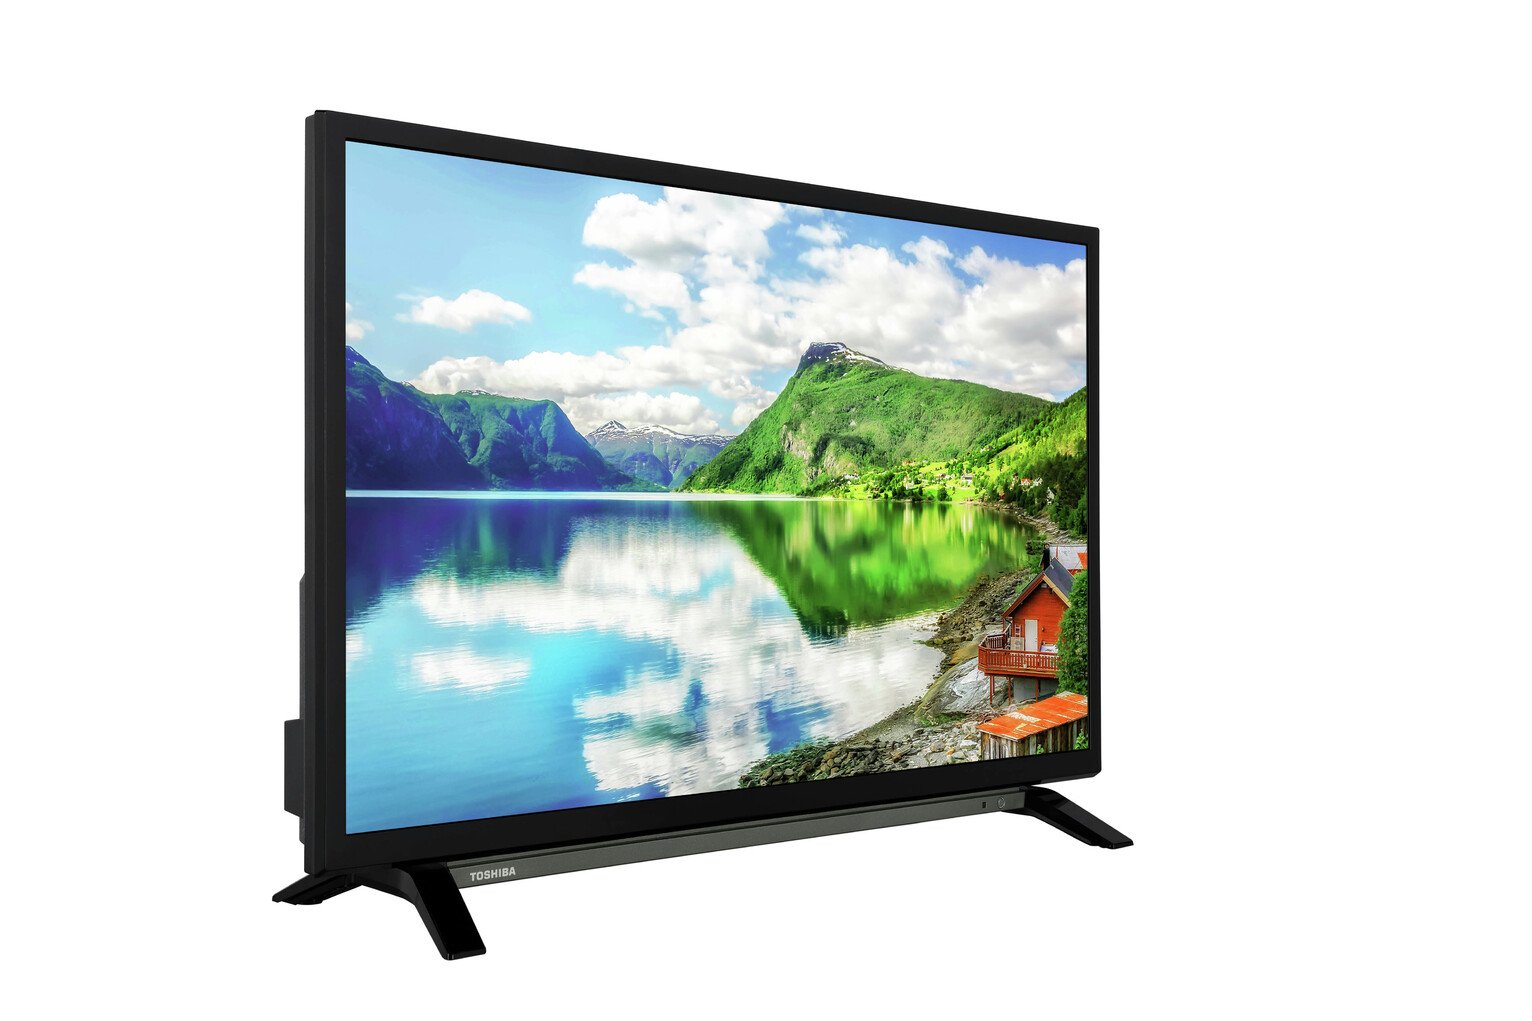 Toshiba 32 Inch Smart Full HD LED TV Review